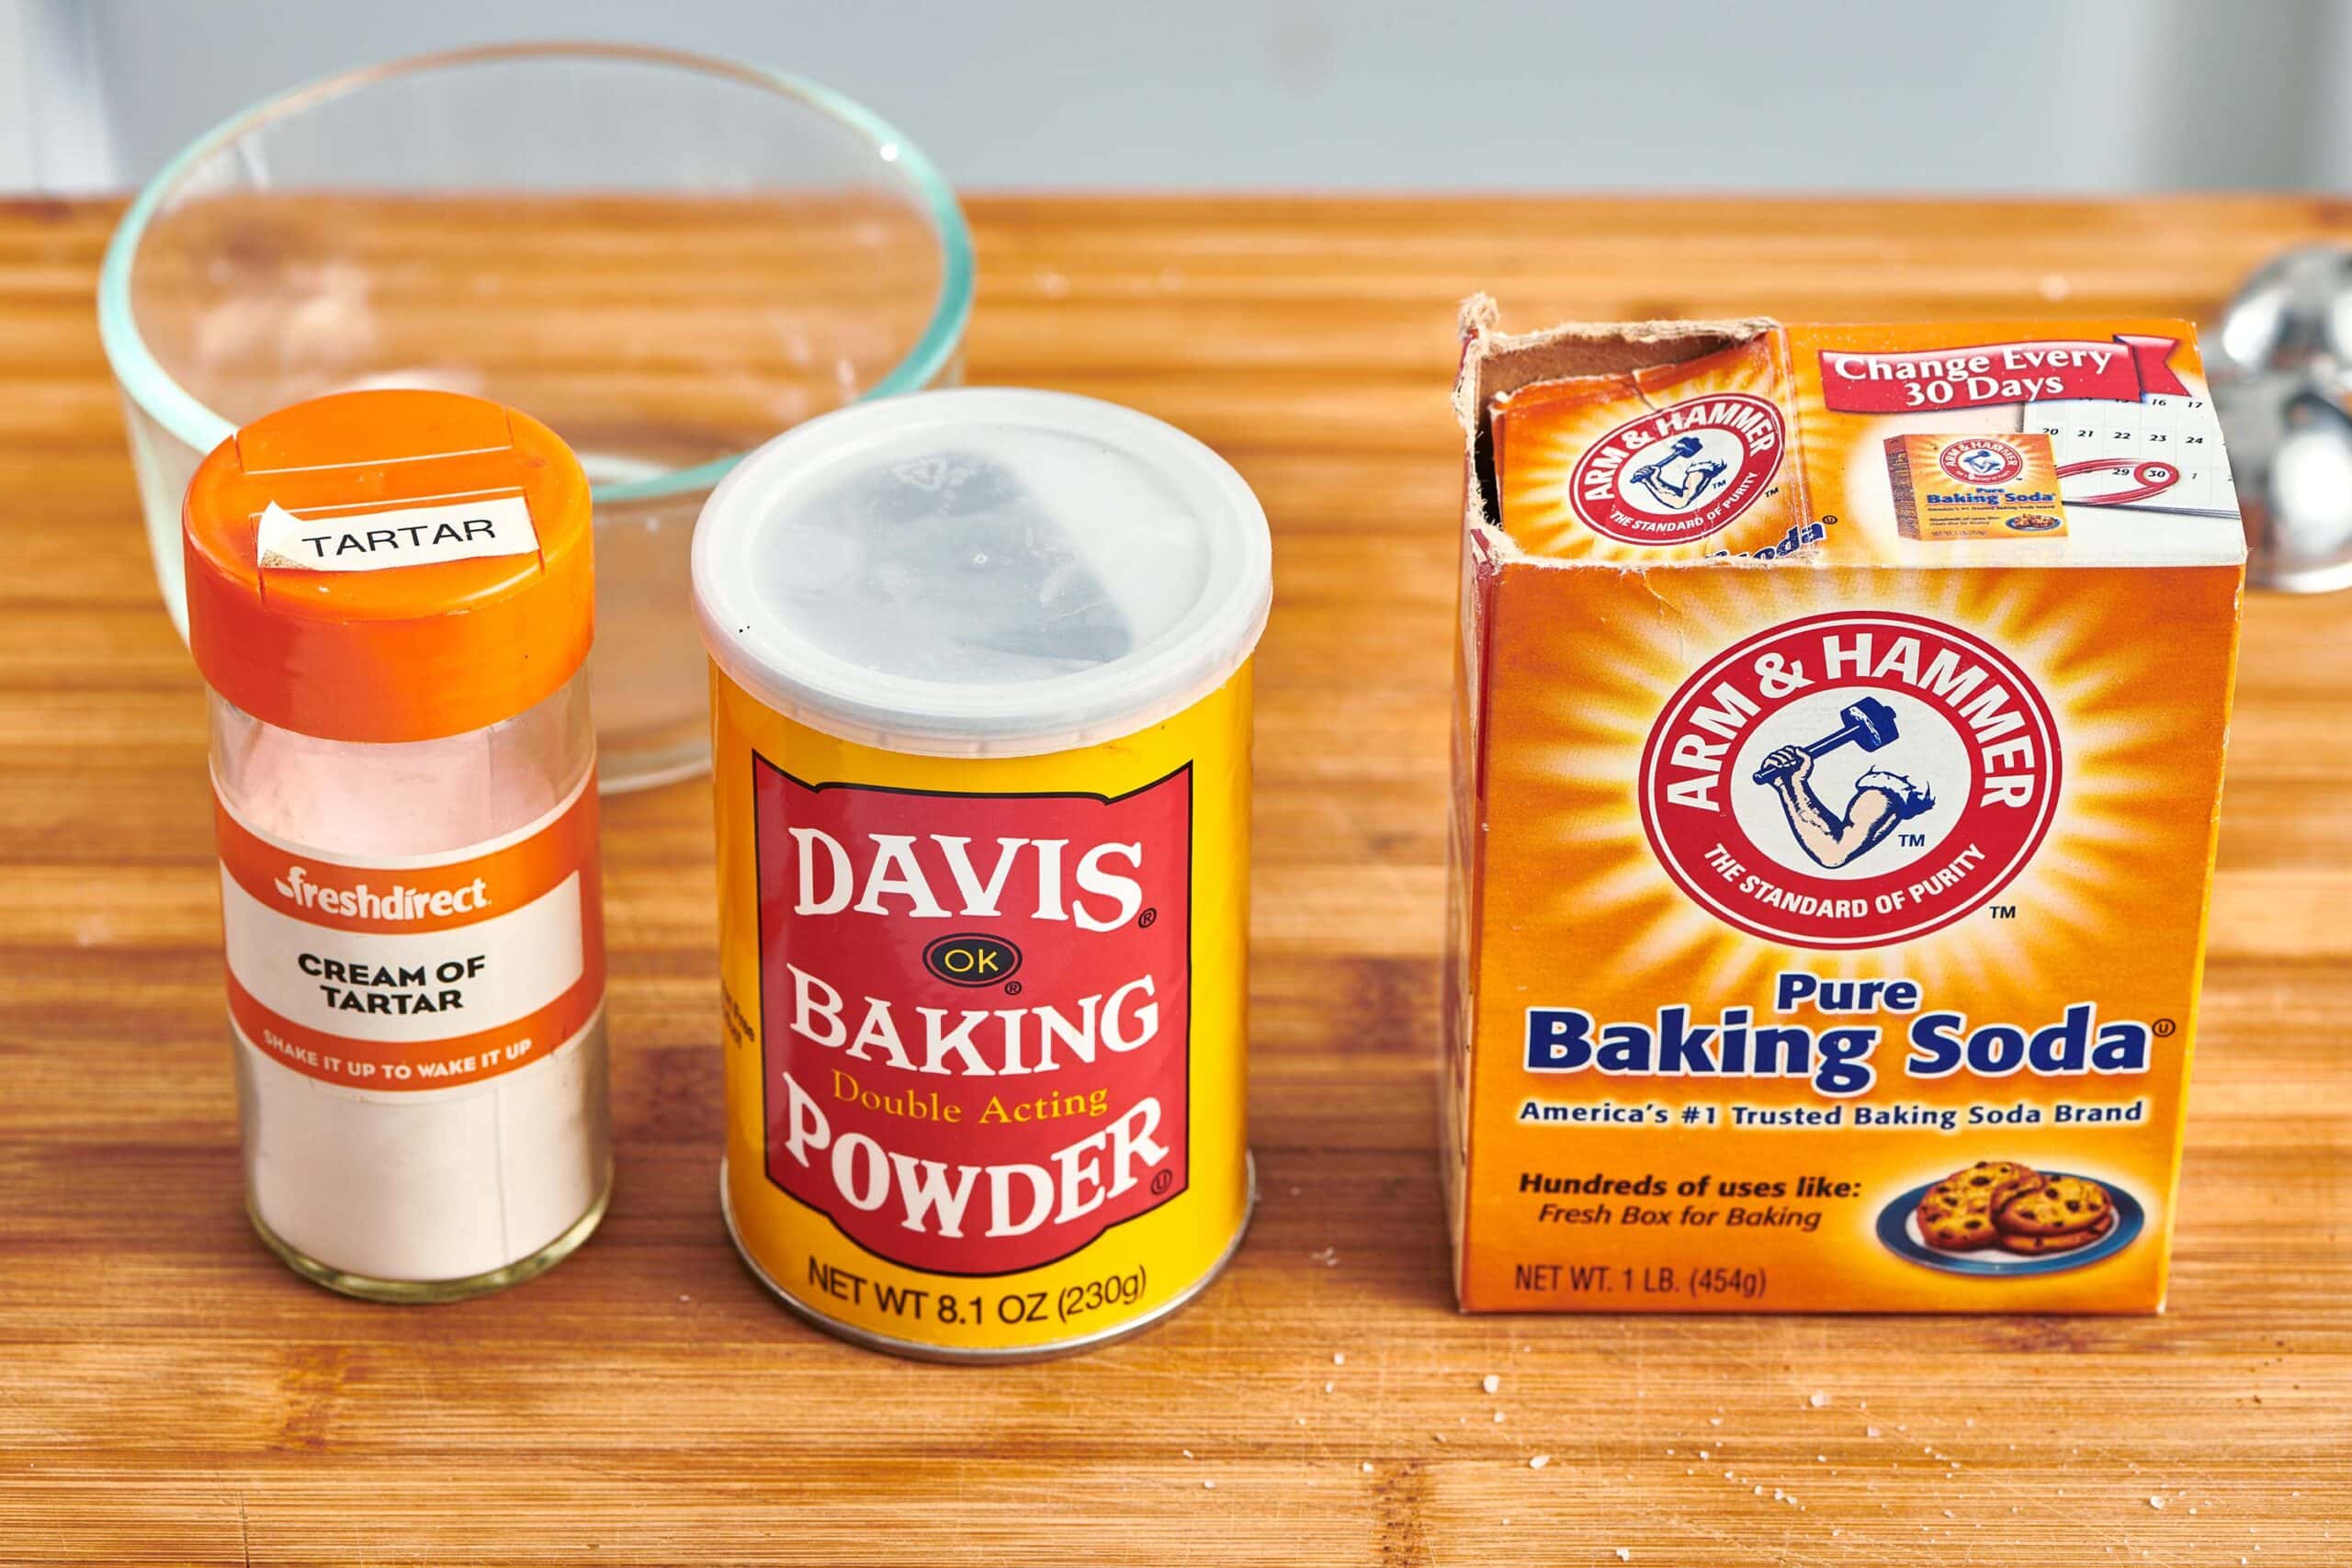 How to Remove Paint from Clothes with Baking Soda